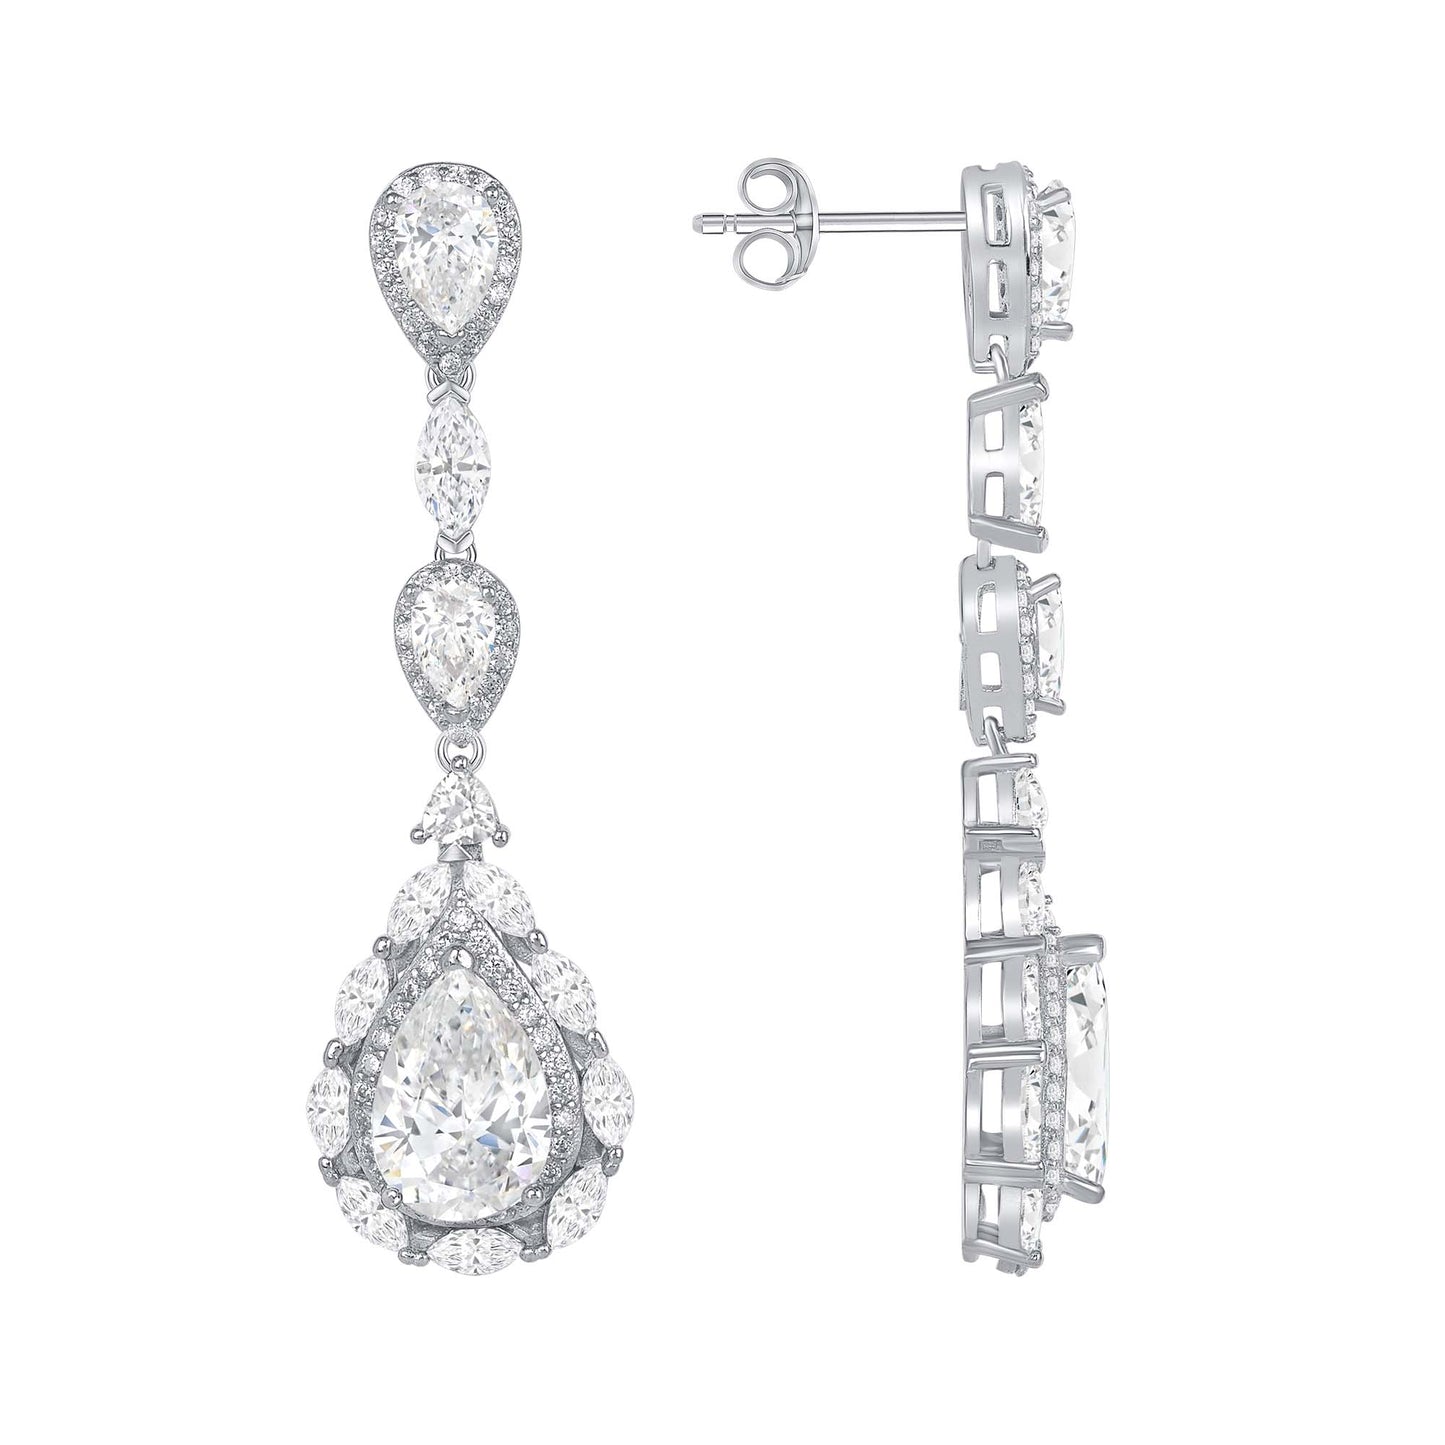 Silver 925 Rhodium Plated Fancy 3 Dangling Pear with Cubic Zirconia Earring. E18201